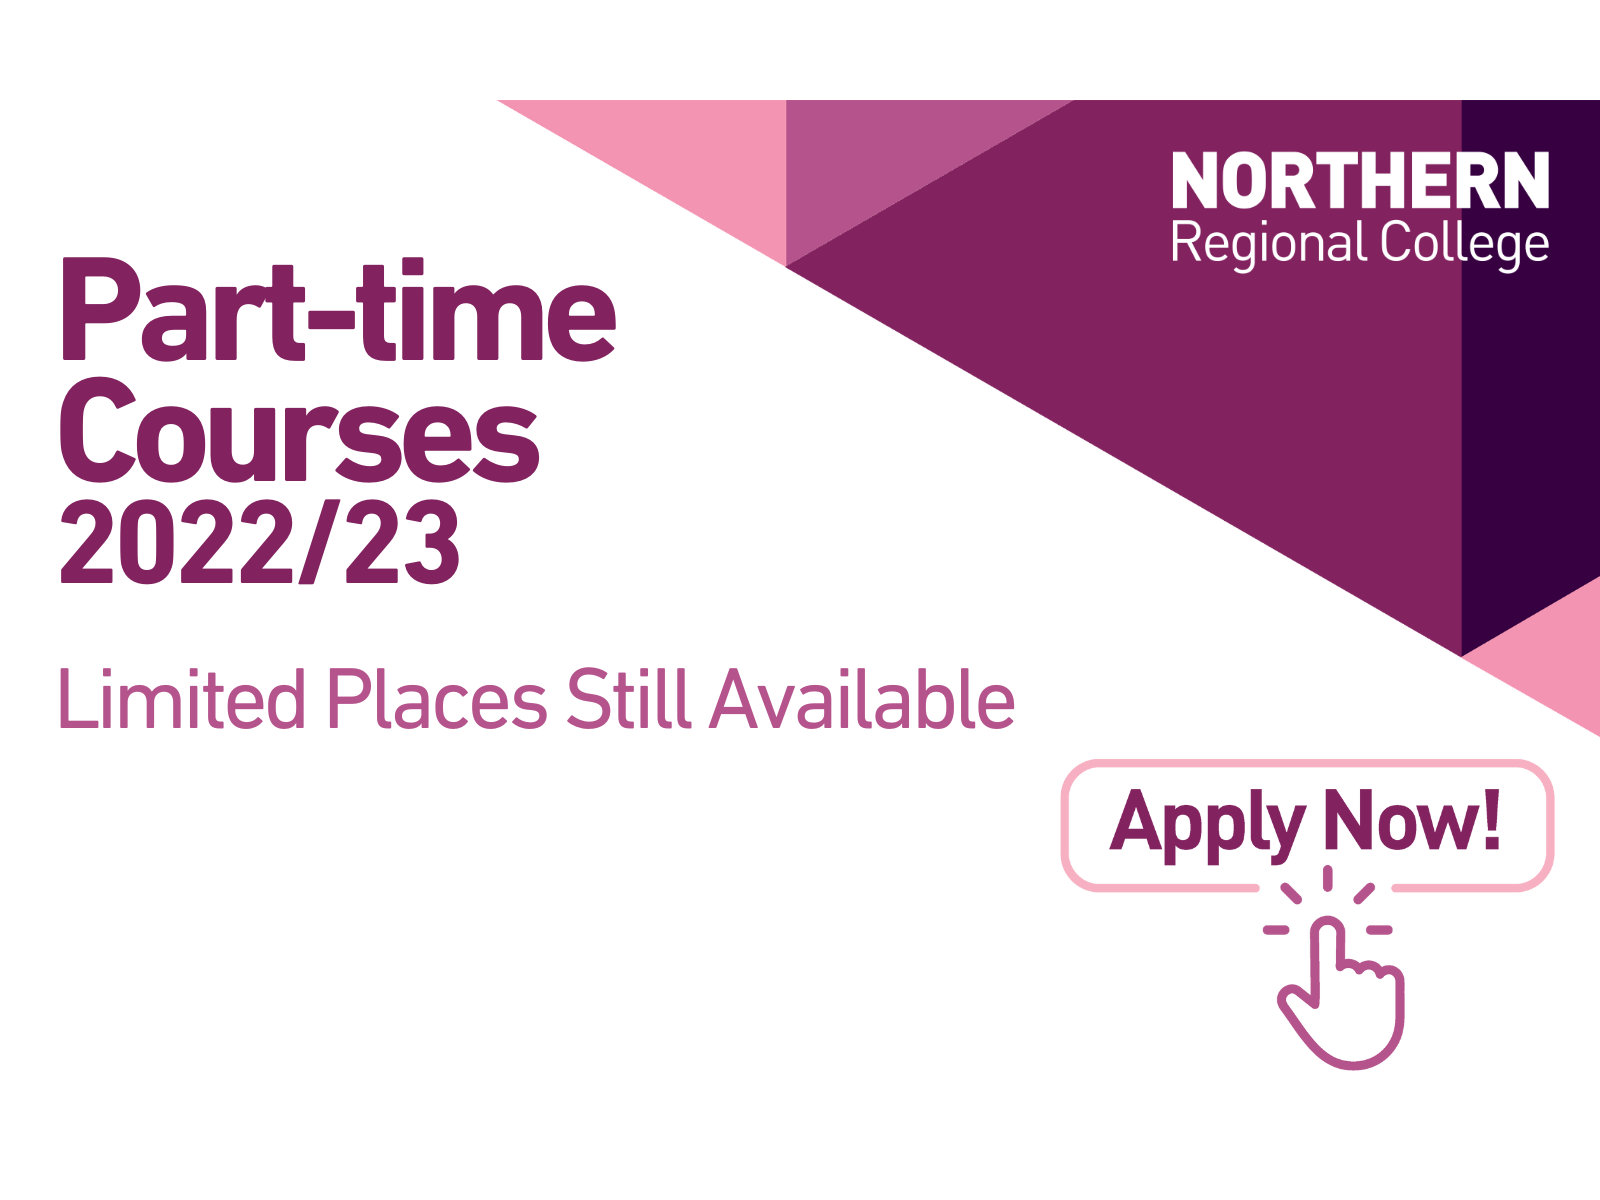 Part-time courses 2022-23 - Limited places still available - Apply Now!